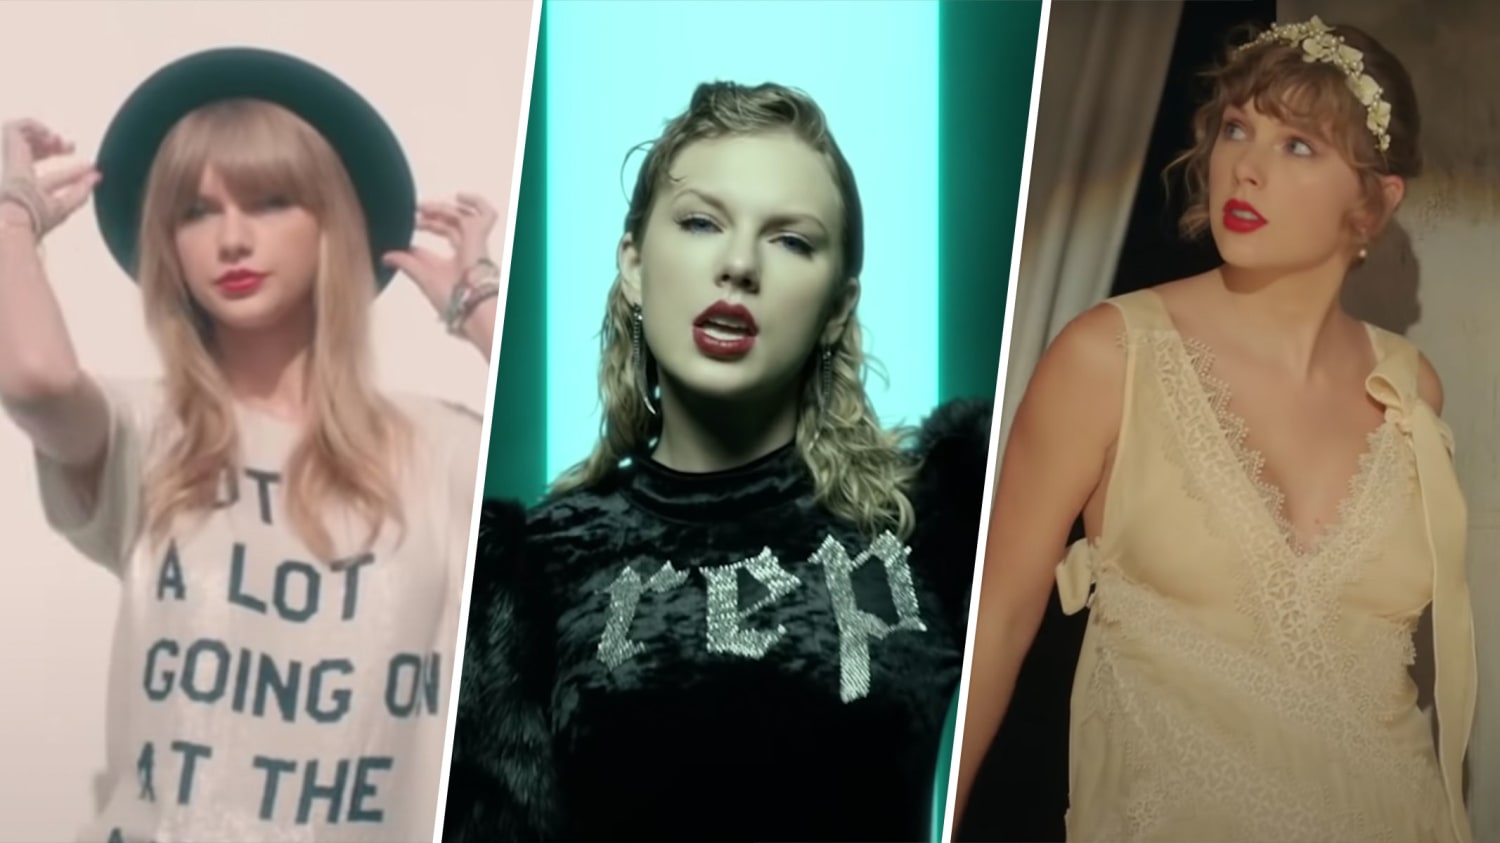 How Does Taylor Swift's 'Reputation' Fit in with The Current